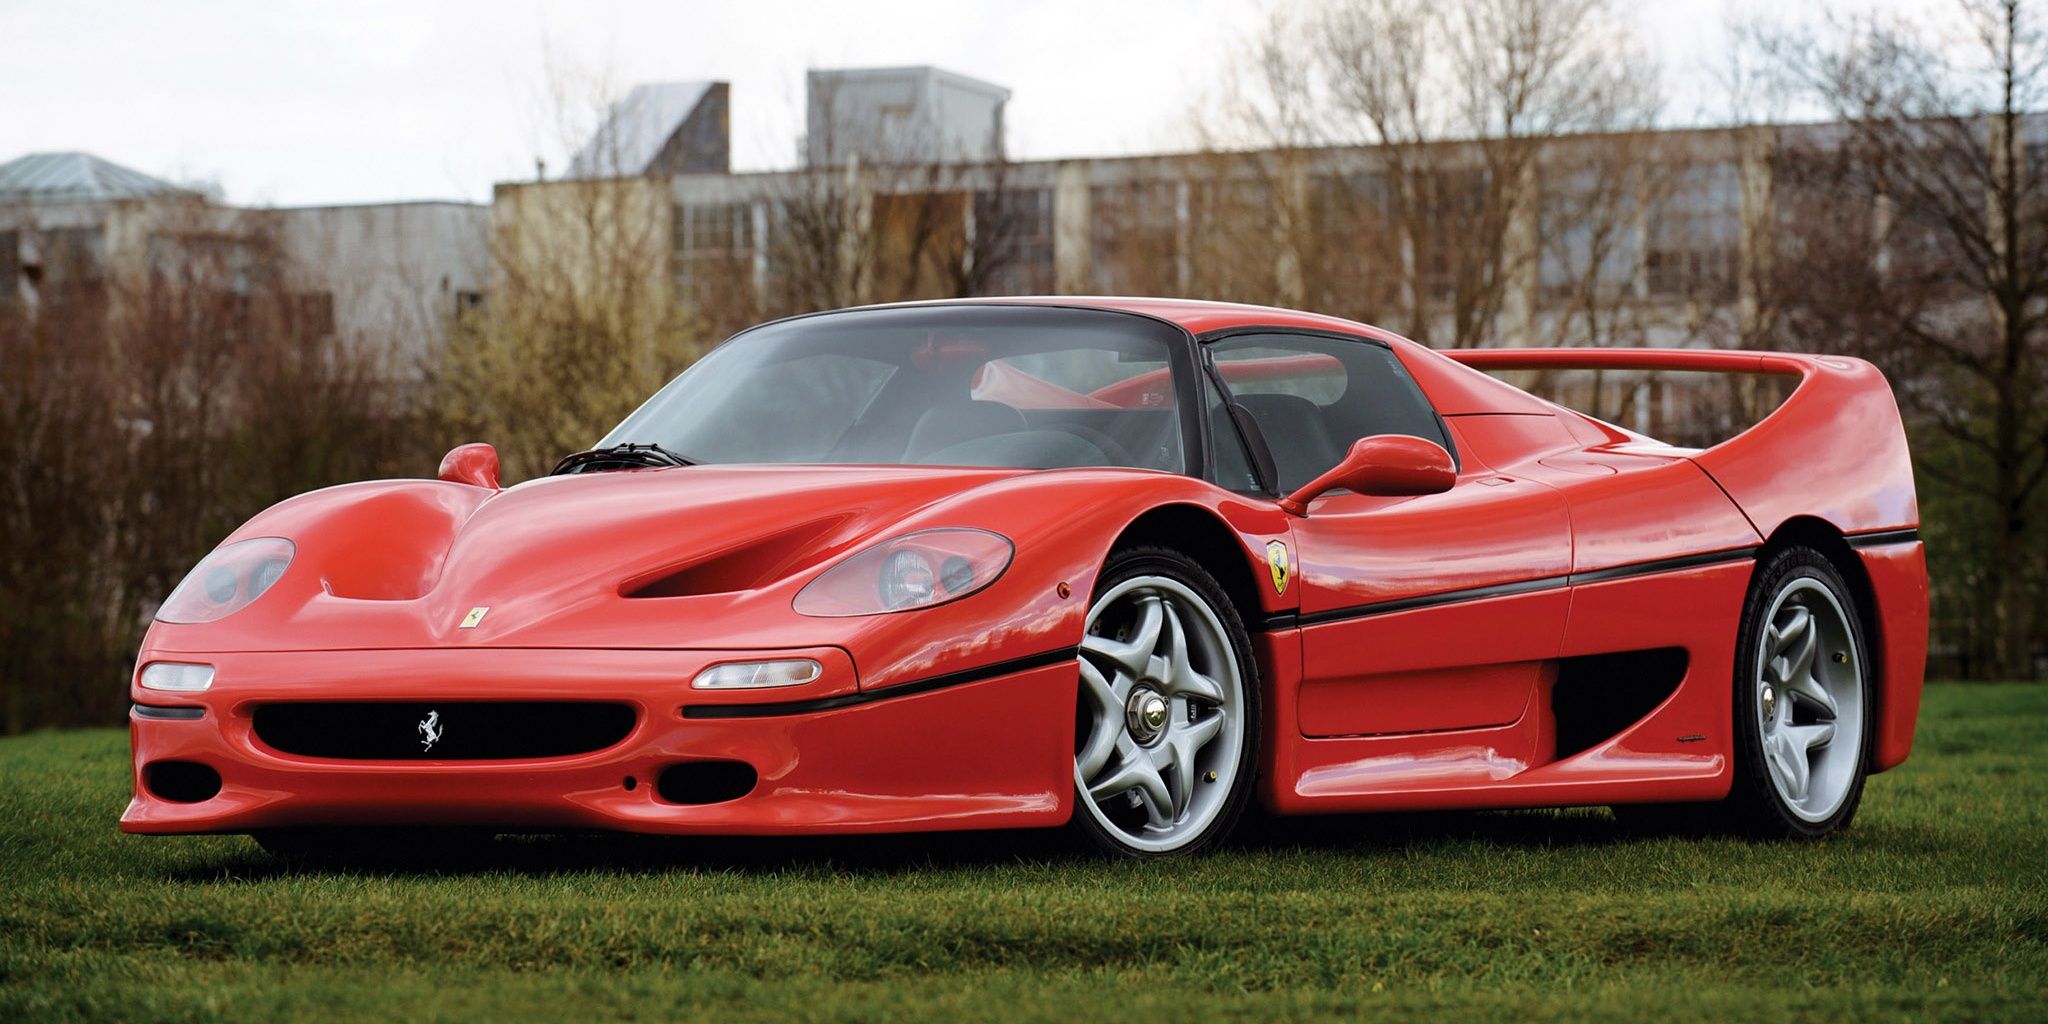 A red 1995 Ferrari F50 parked in a ground